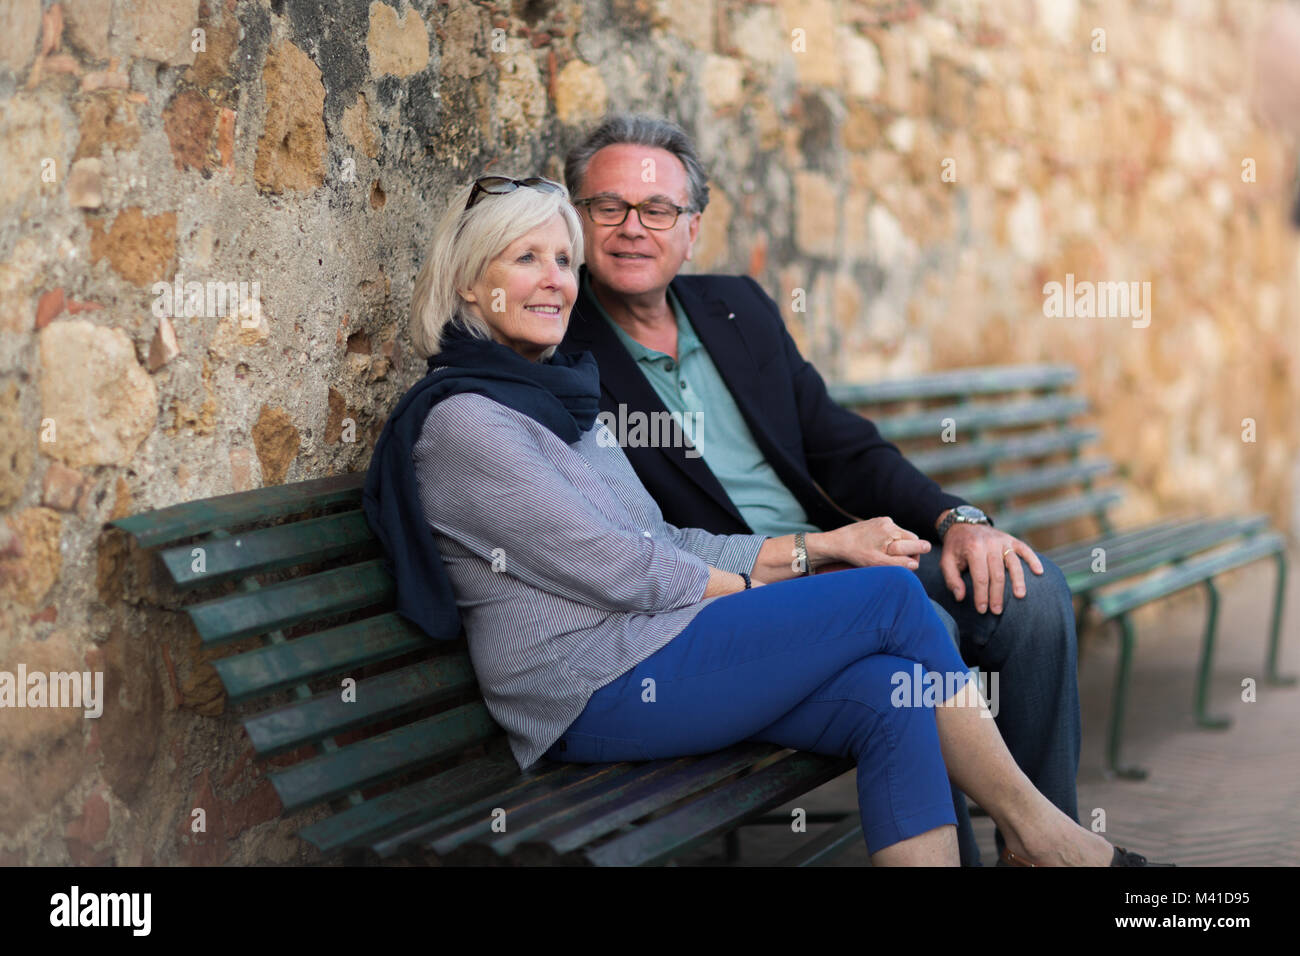 Senior couple sitting on bench relaxing Banque D'Images